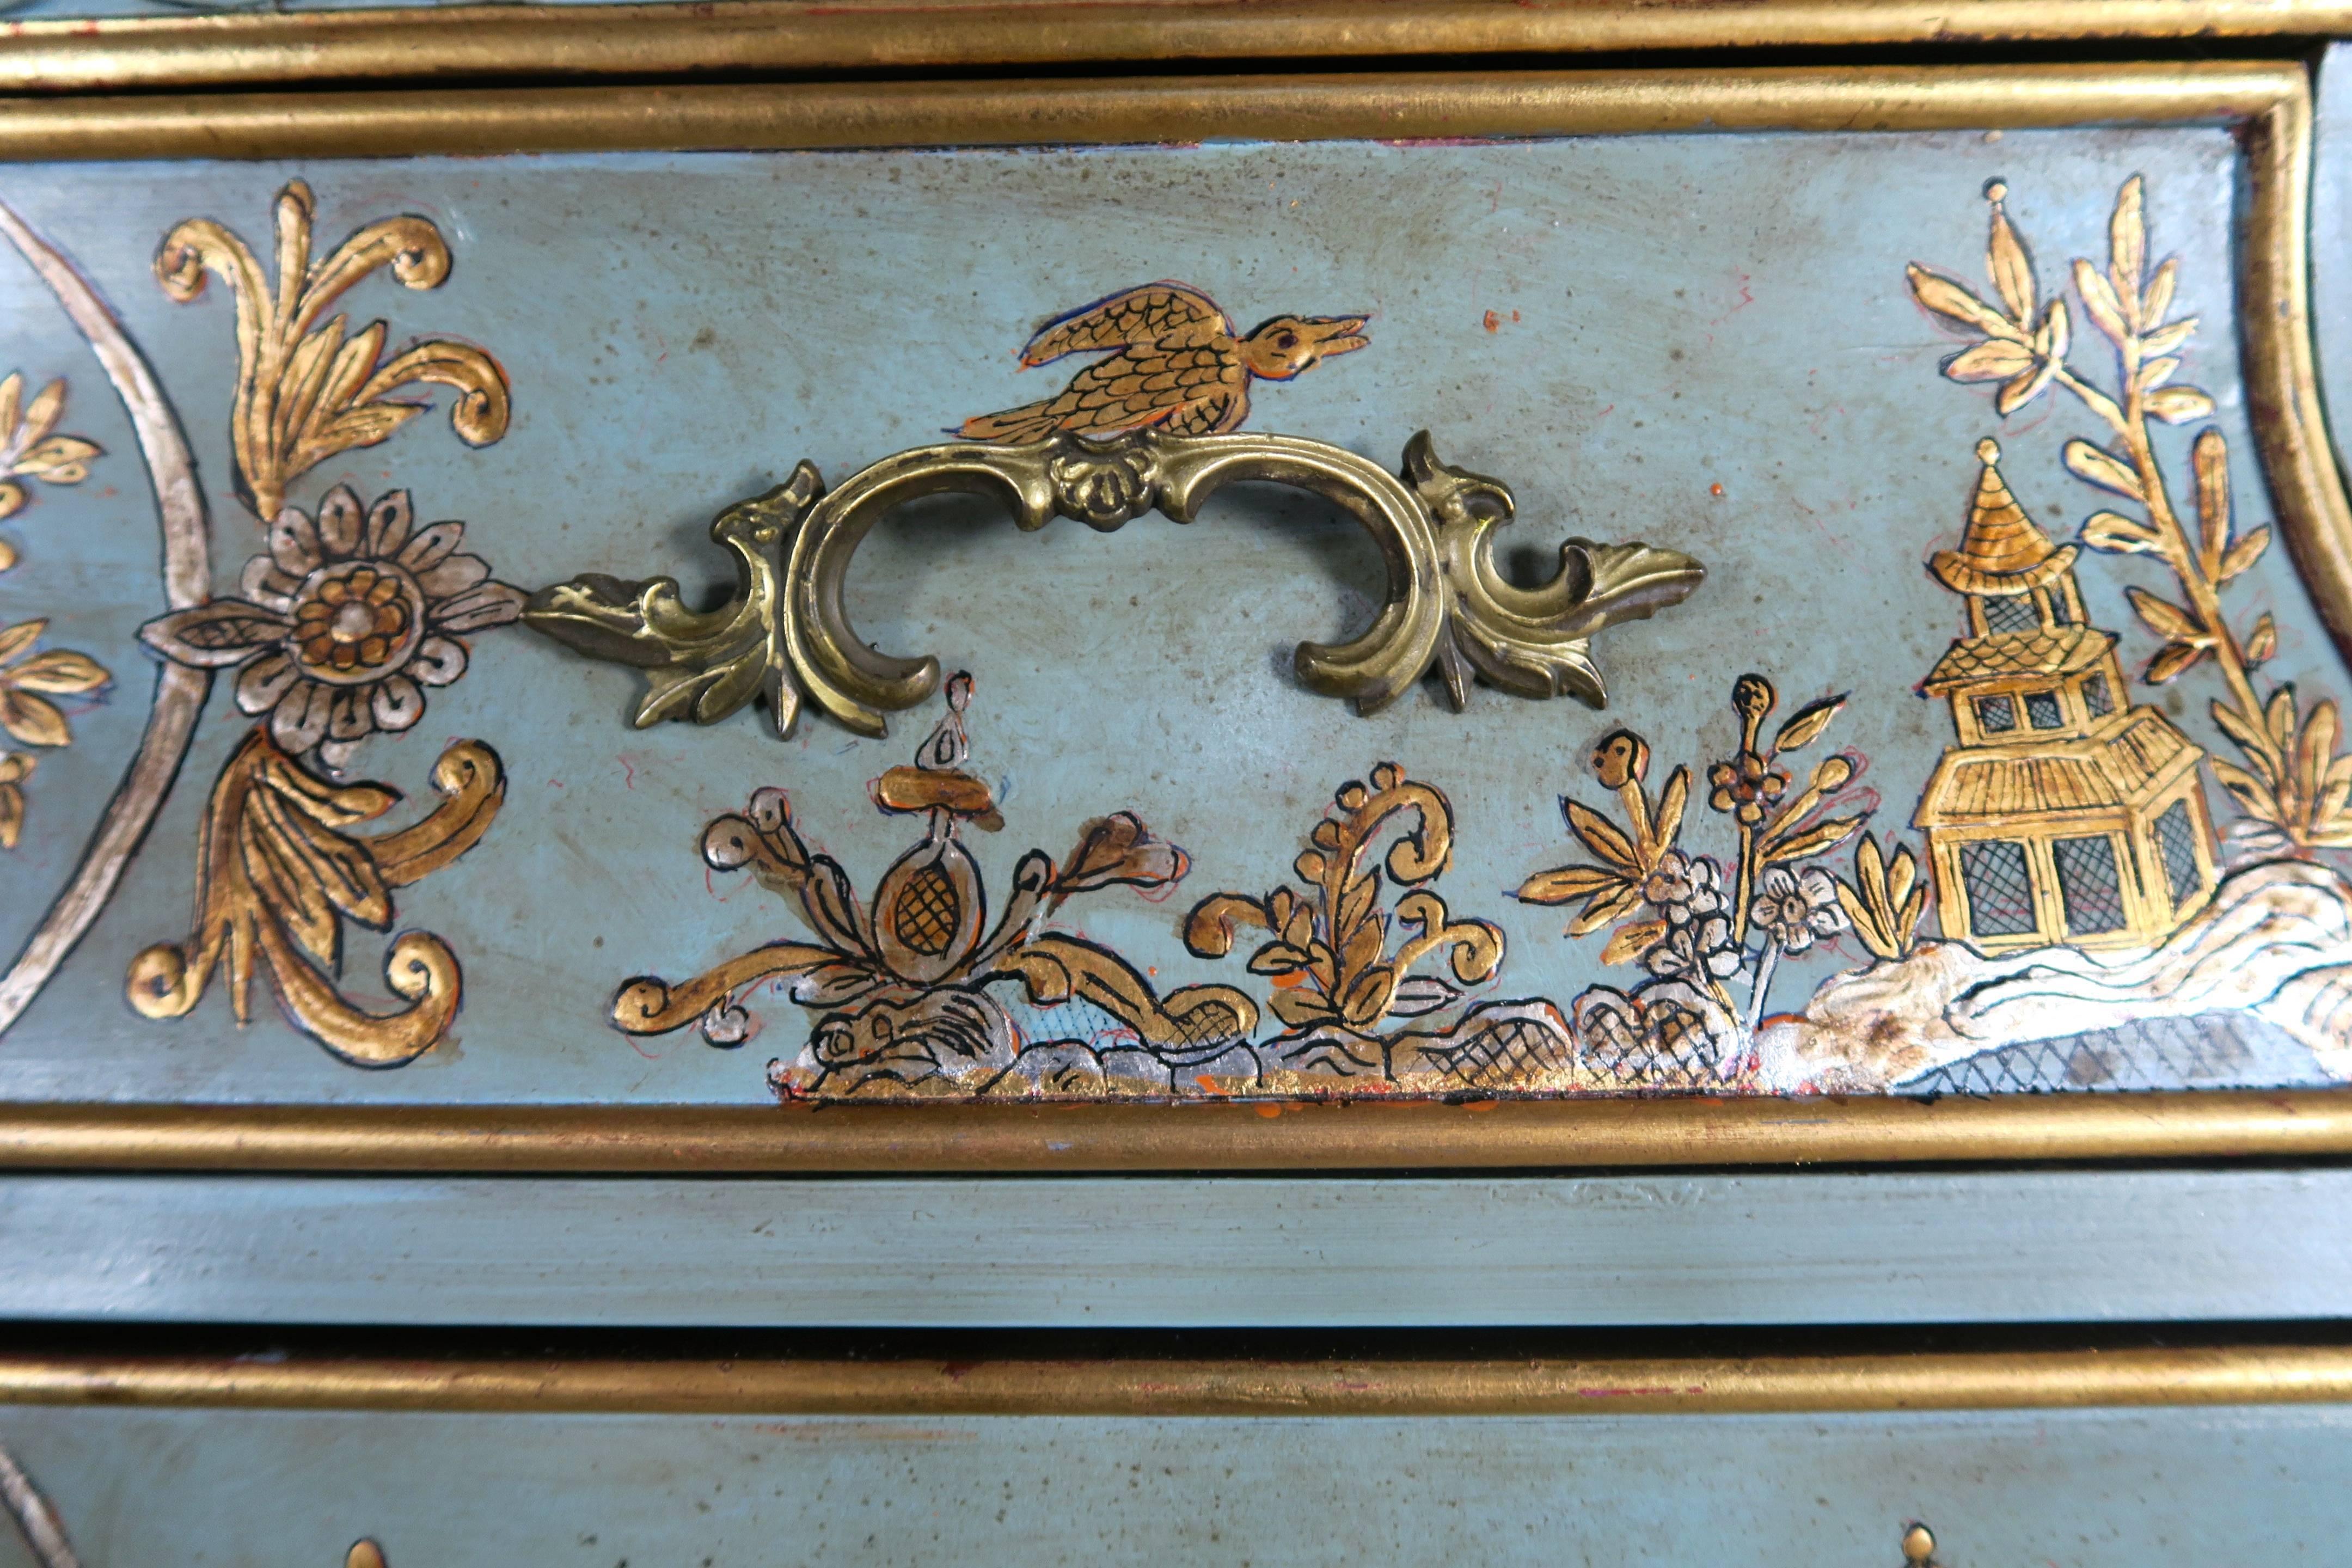 Hand-Painted Pair of French Painted Chinoiserie Bombay Shaped Chests with Three Drawers Each